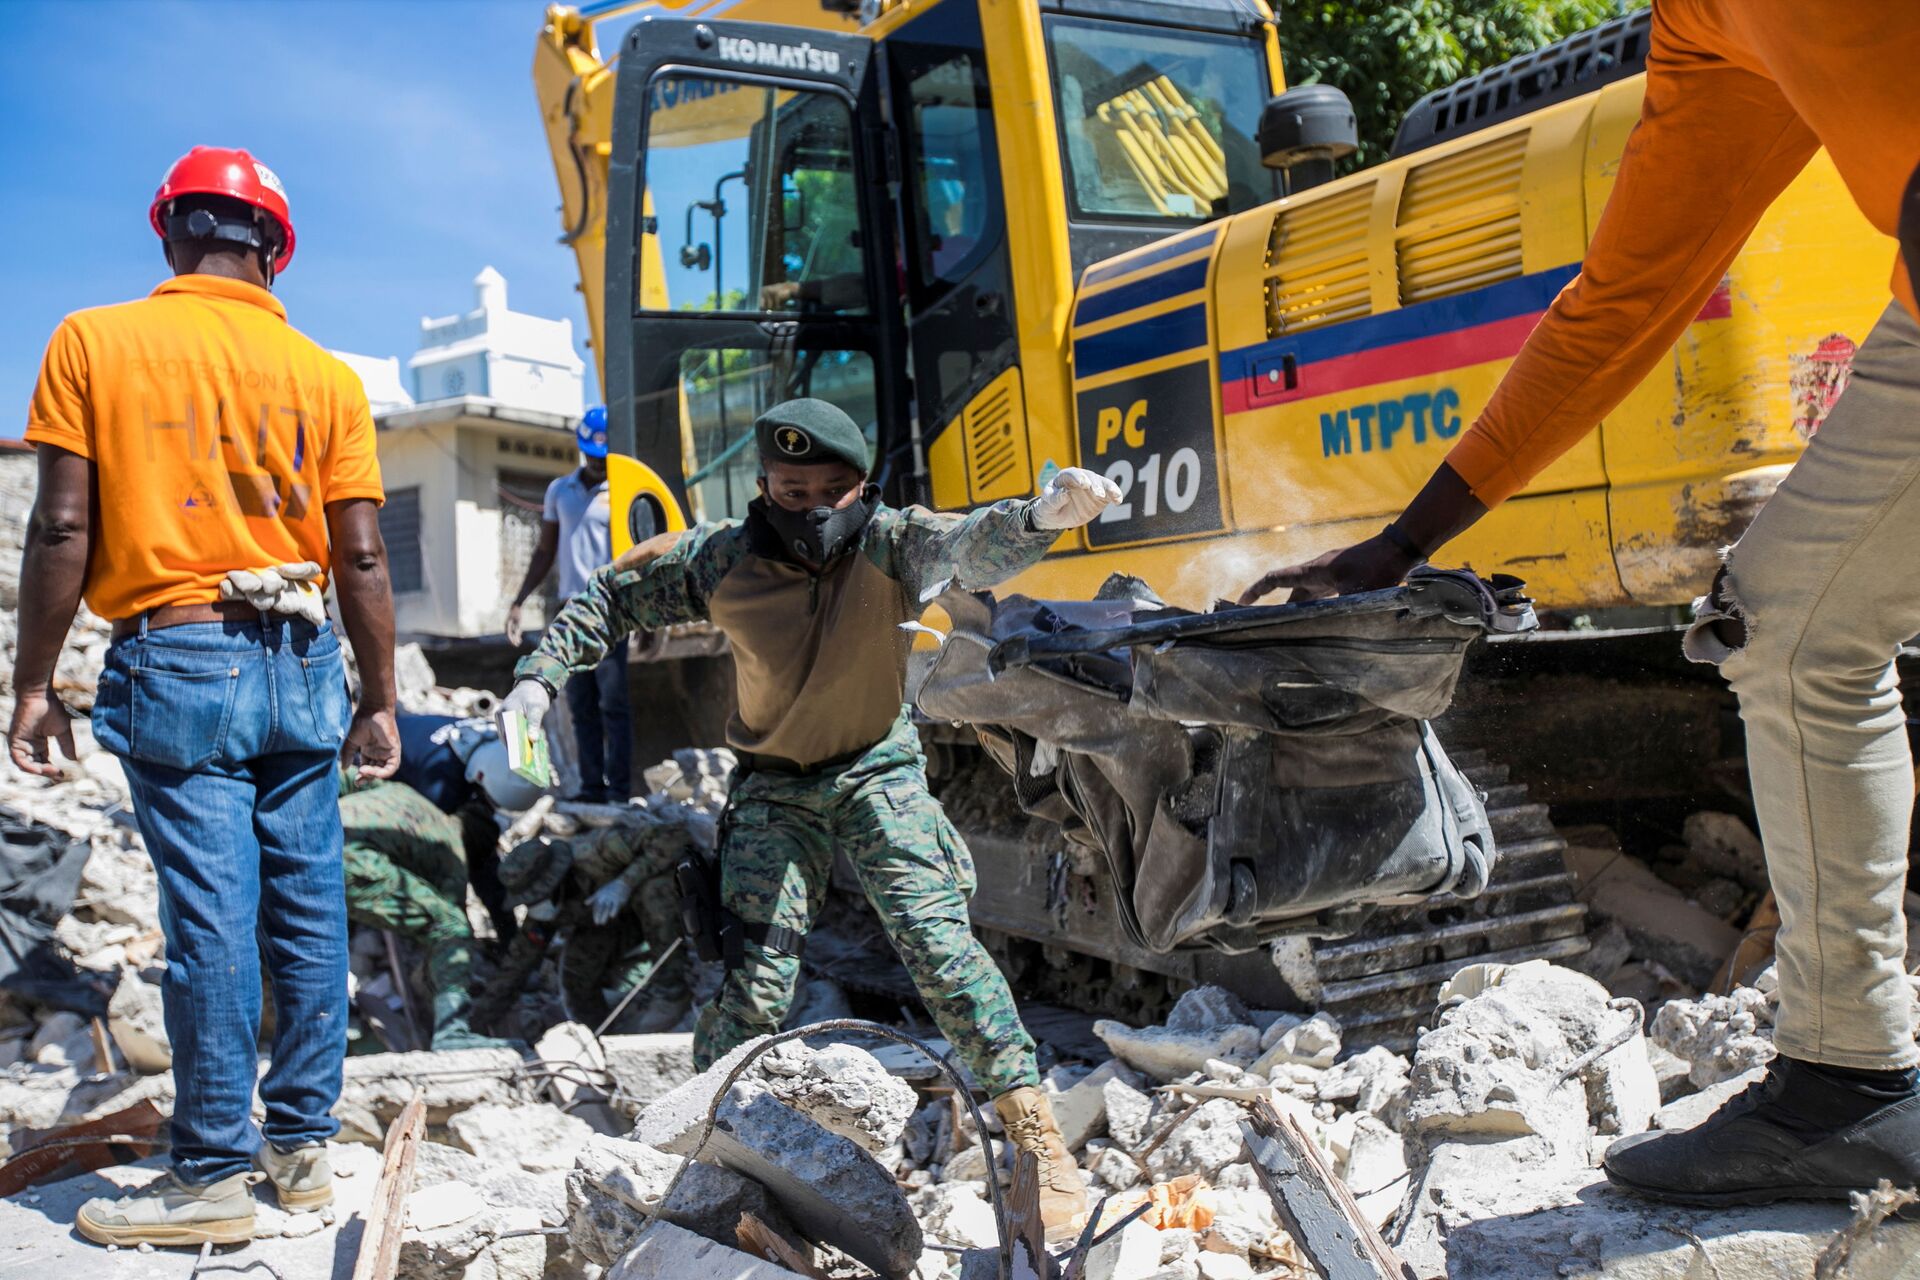 Soldiers and members of a rescue and protection team clean debris from a house after a 7.2 magnitude earthquake in Les Cayes, Haiti August 15, 2021 - Sputnik International, 1920, 30.09.2021